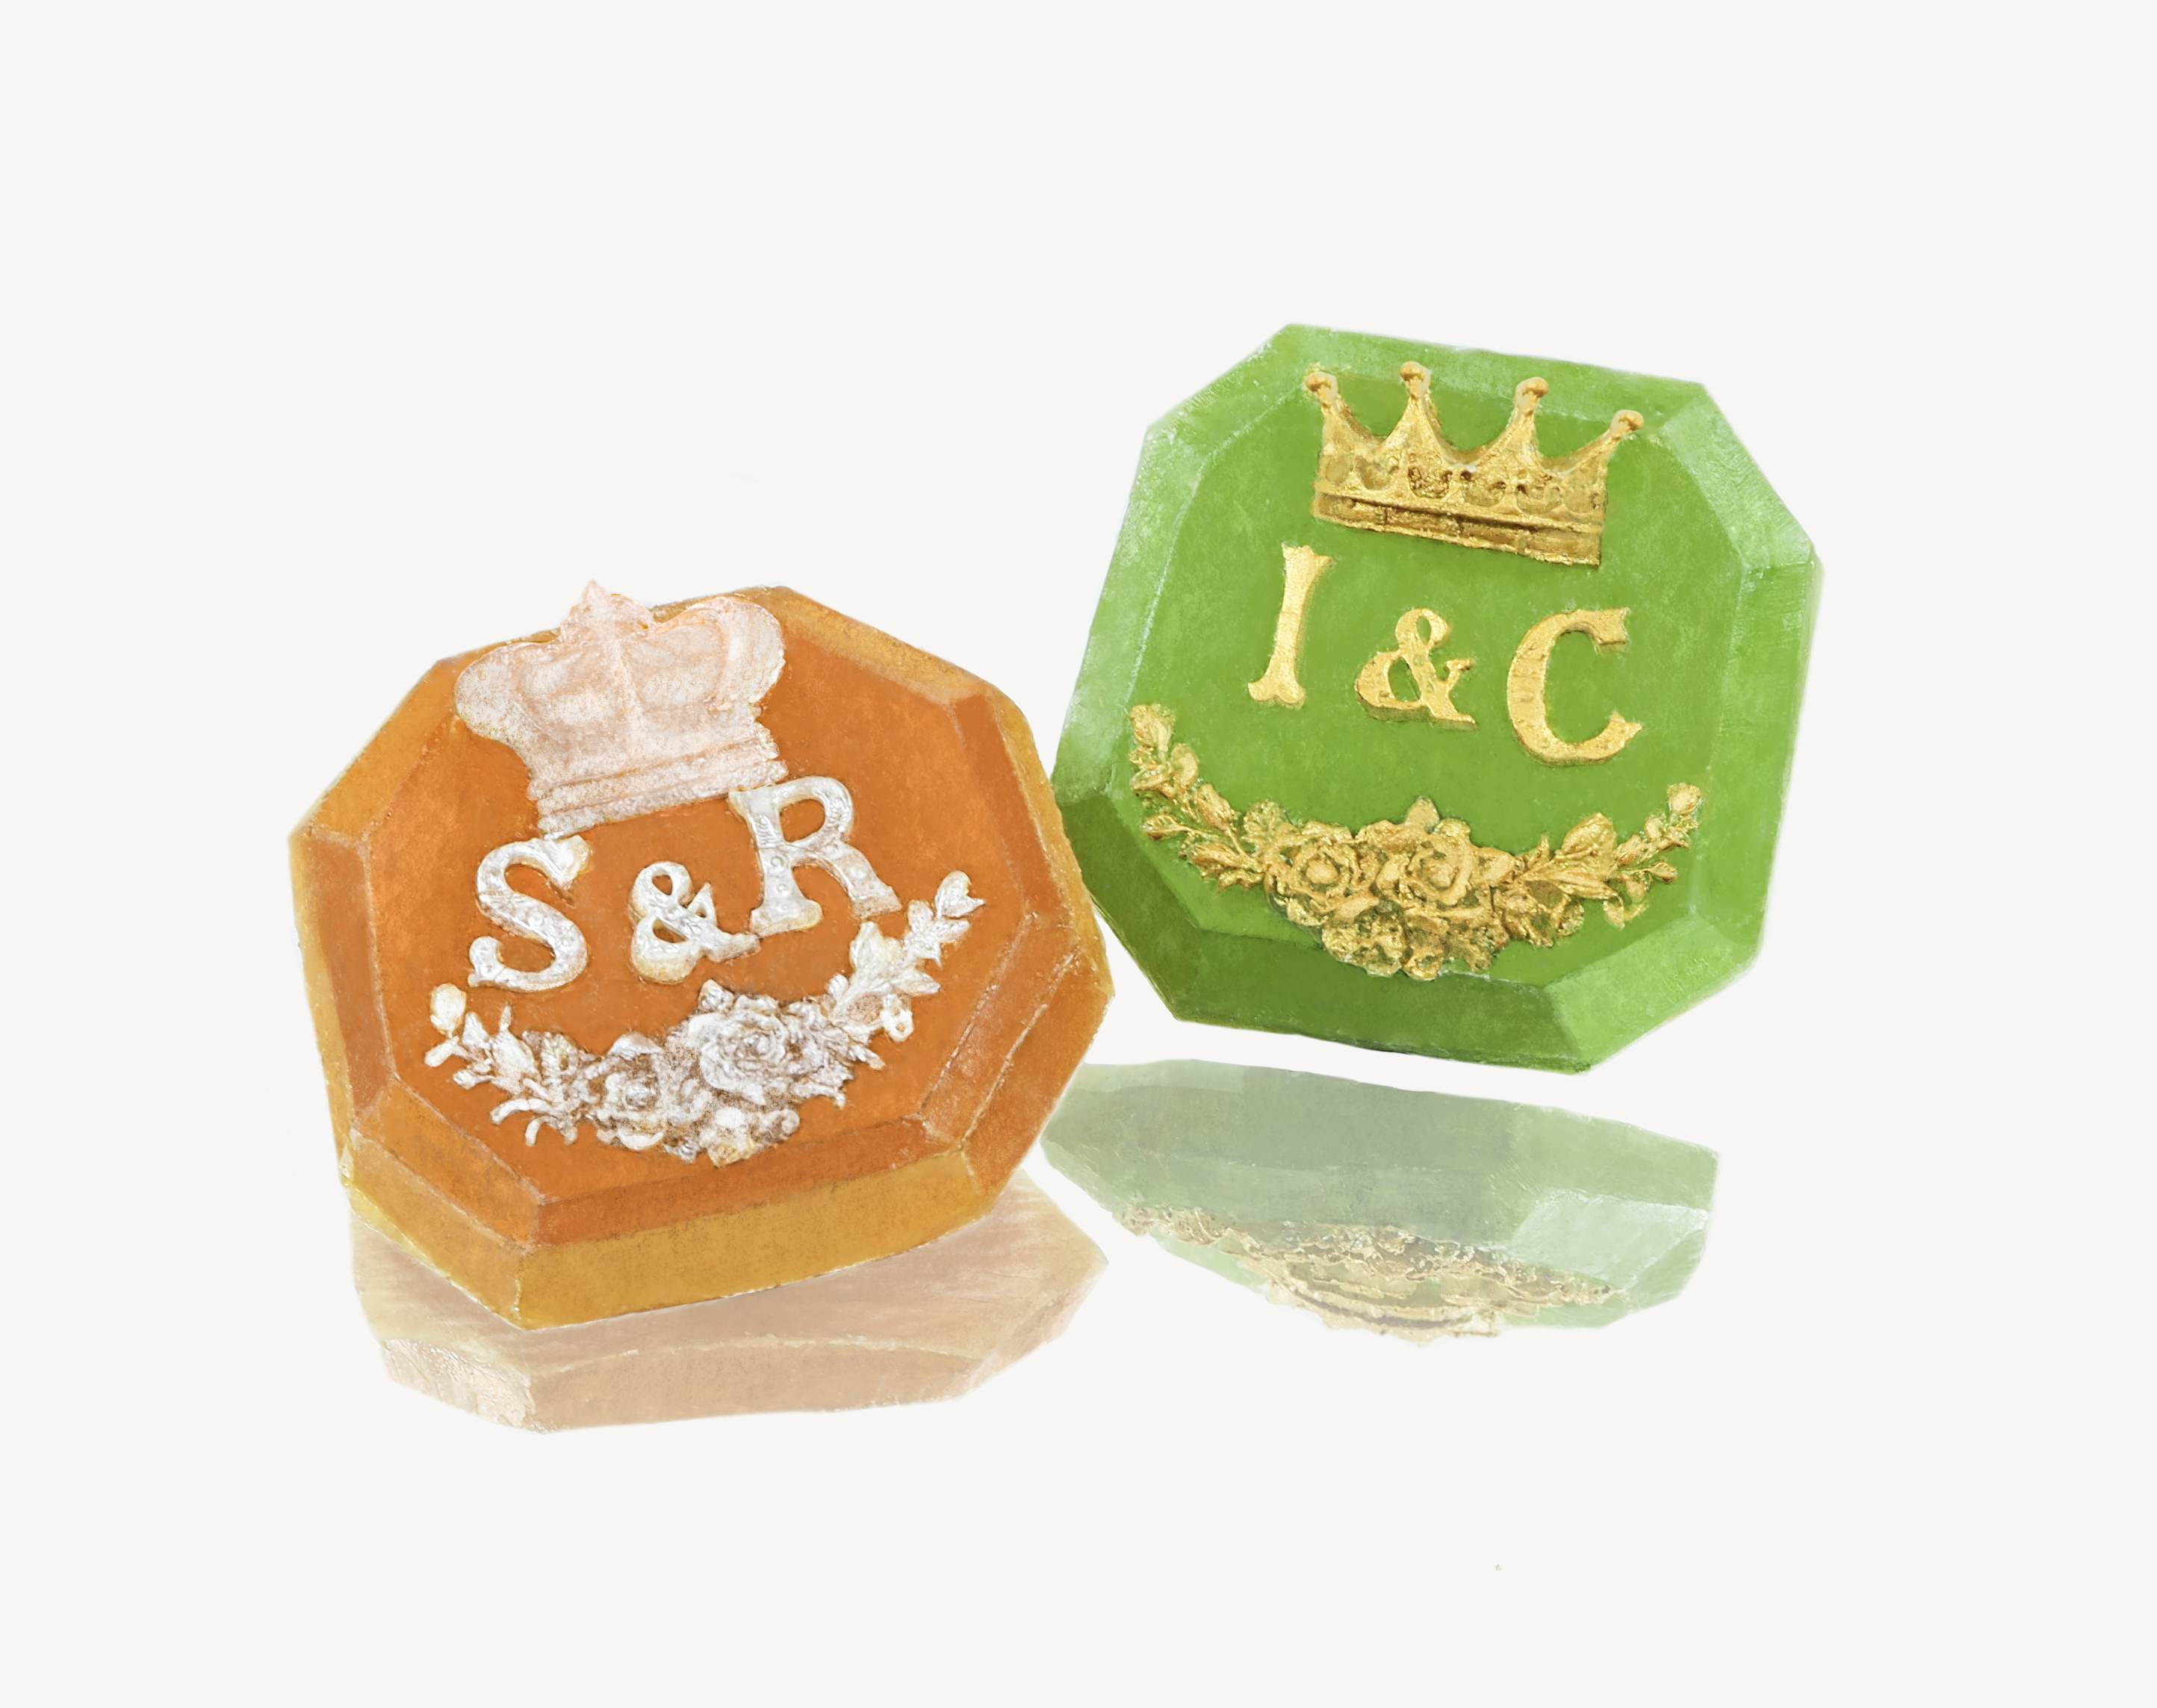 Two octagonal-shaped sweets, one orange with 'S&R' written under a crown and floral design, and the other green with 'I&C' under a crown and surrounded by a floral wreath, both with a gold decorative finish. They are placed on a white background with their reflections partially visible.